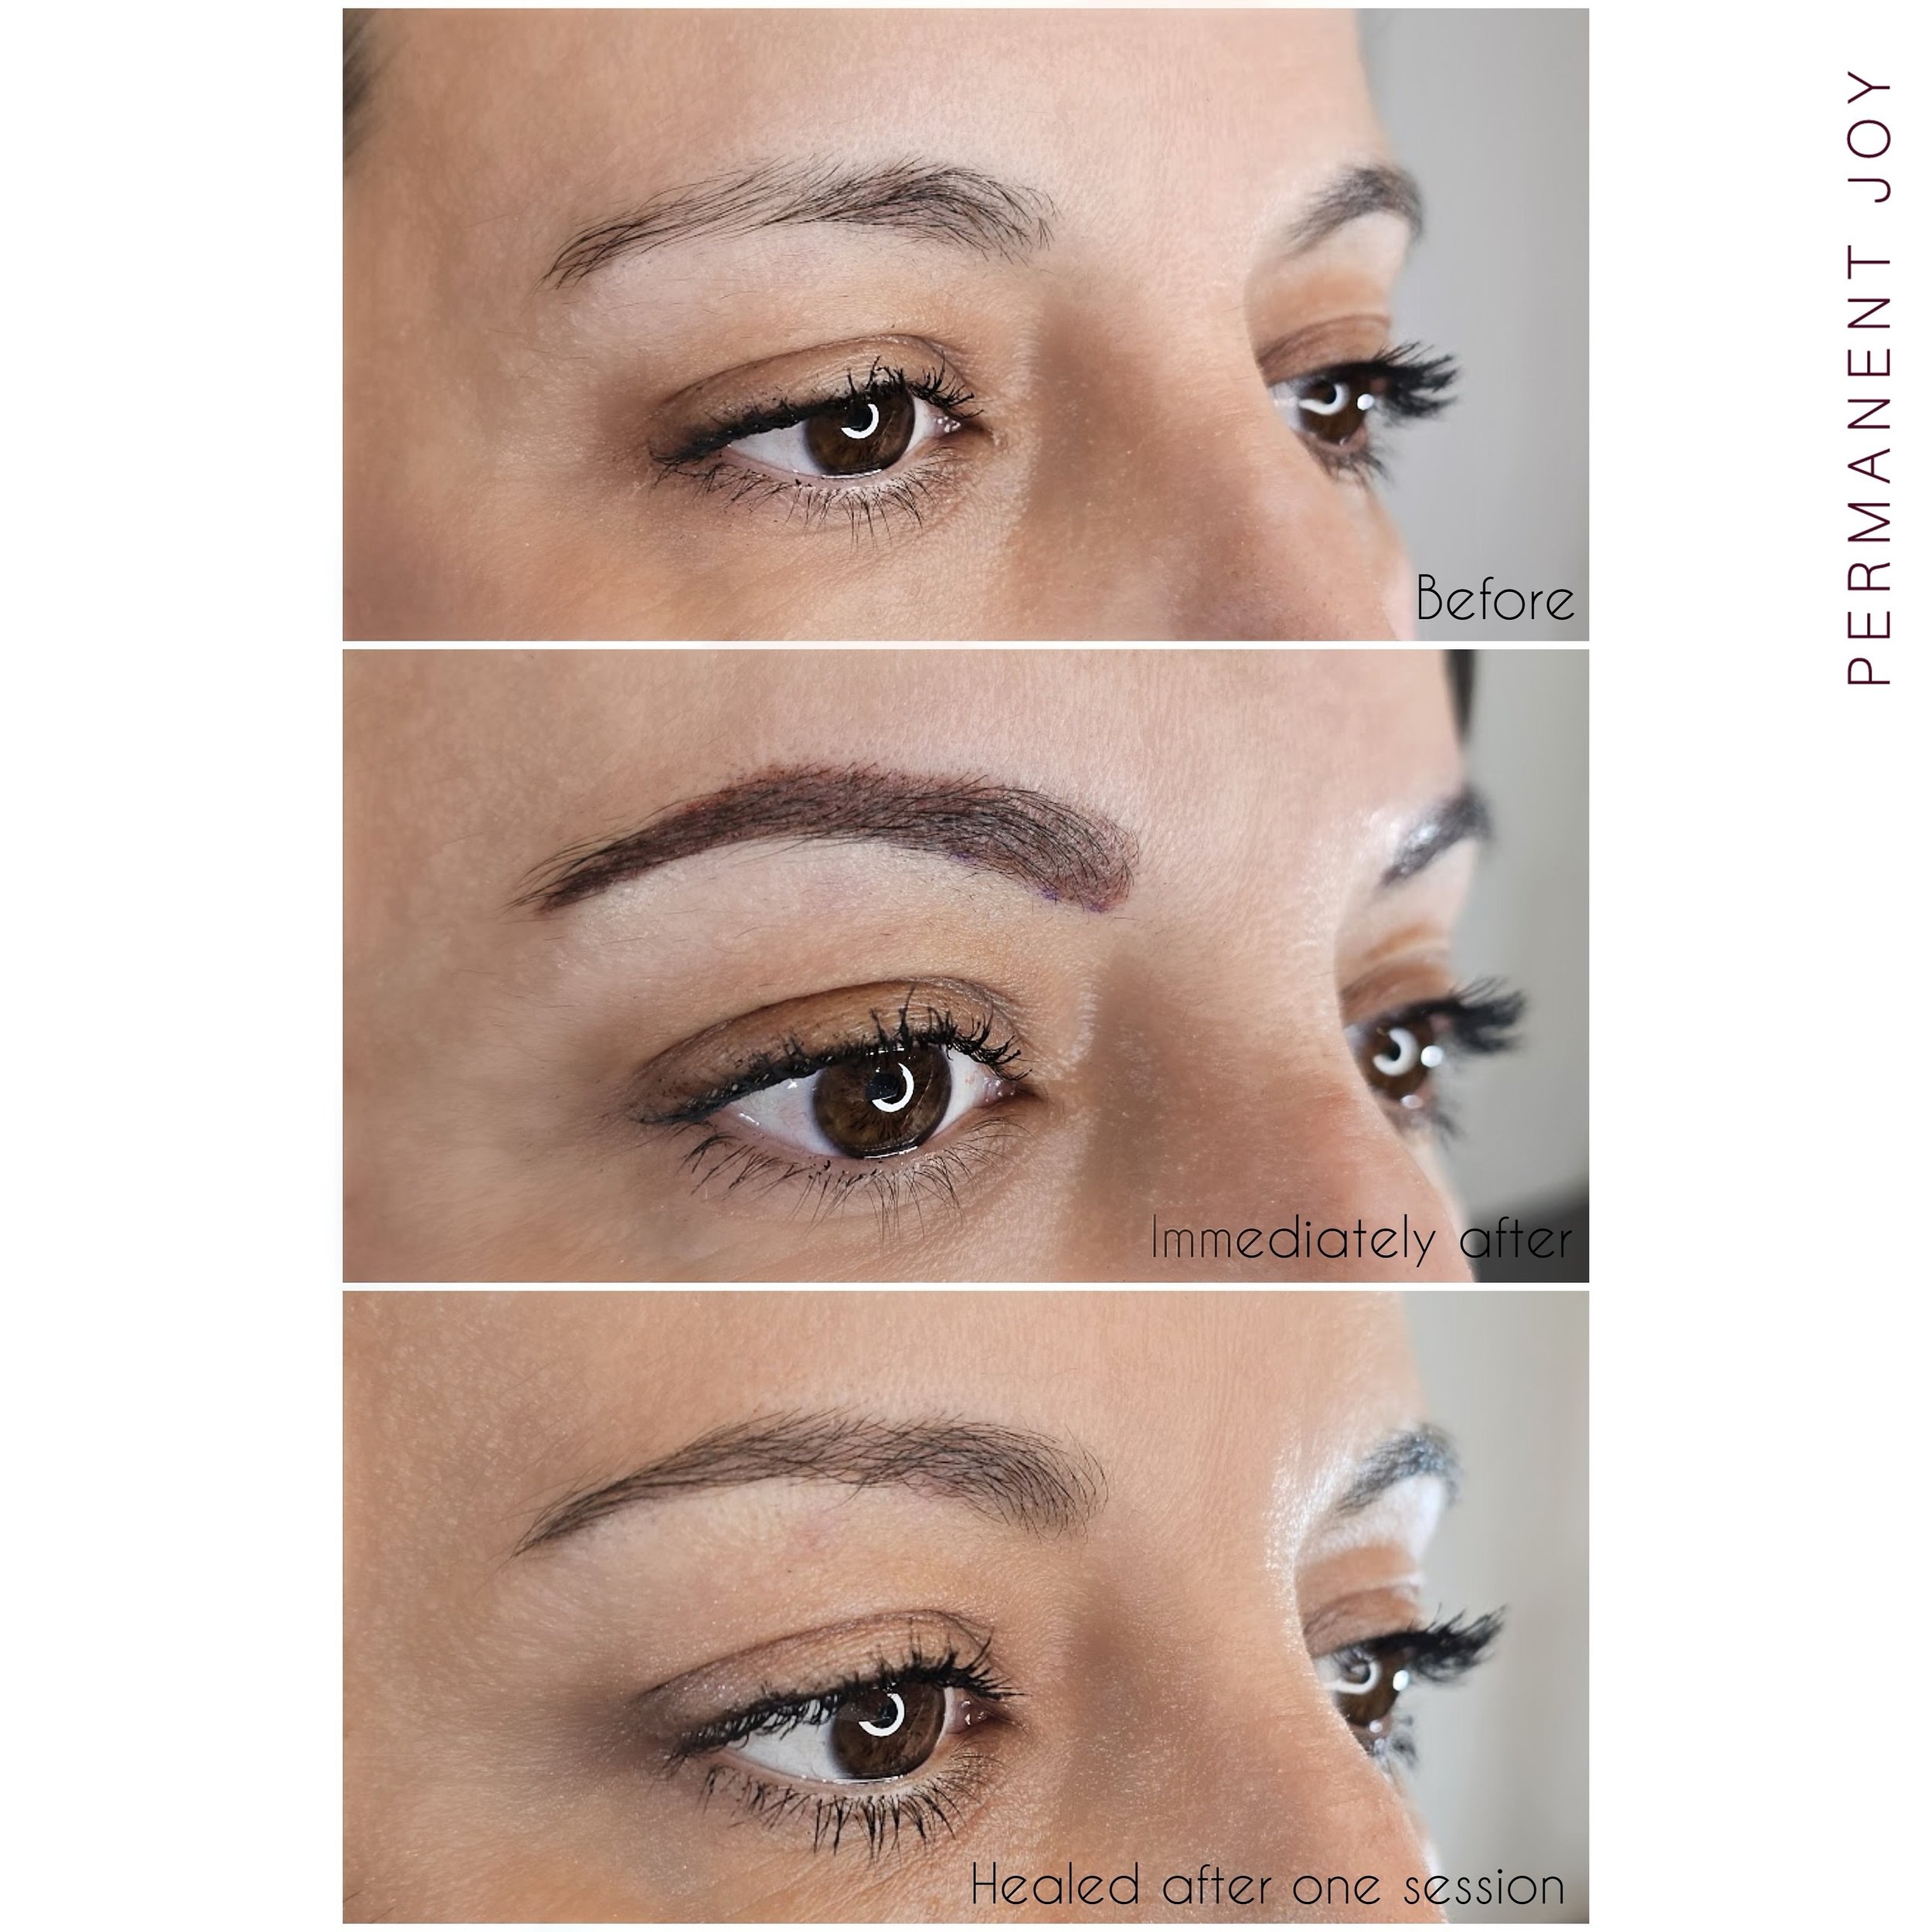 Embrace Natural Beauty with Subtle Permanent Brows ❣️

Who says permanent brows have to be sharp and stark? With my expert touch, you can enjoy beautifully natural brows that nobody would guess are tattooed. Perfect for everyday elegance, and if you 